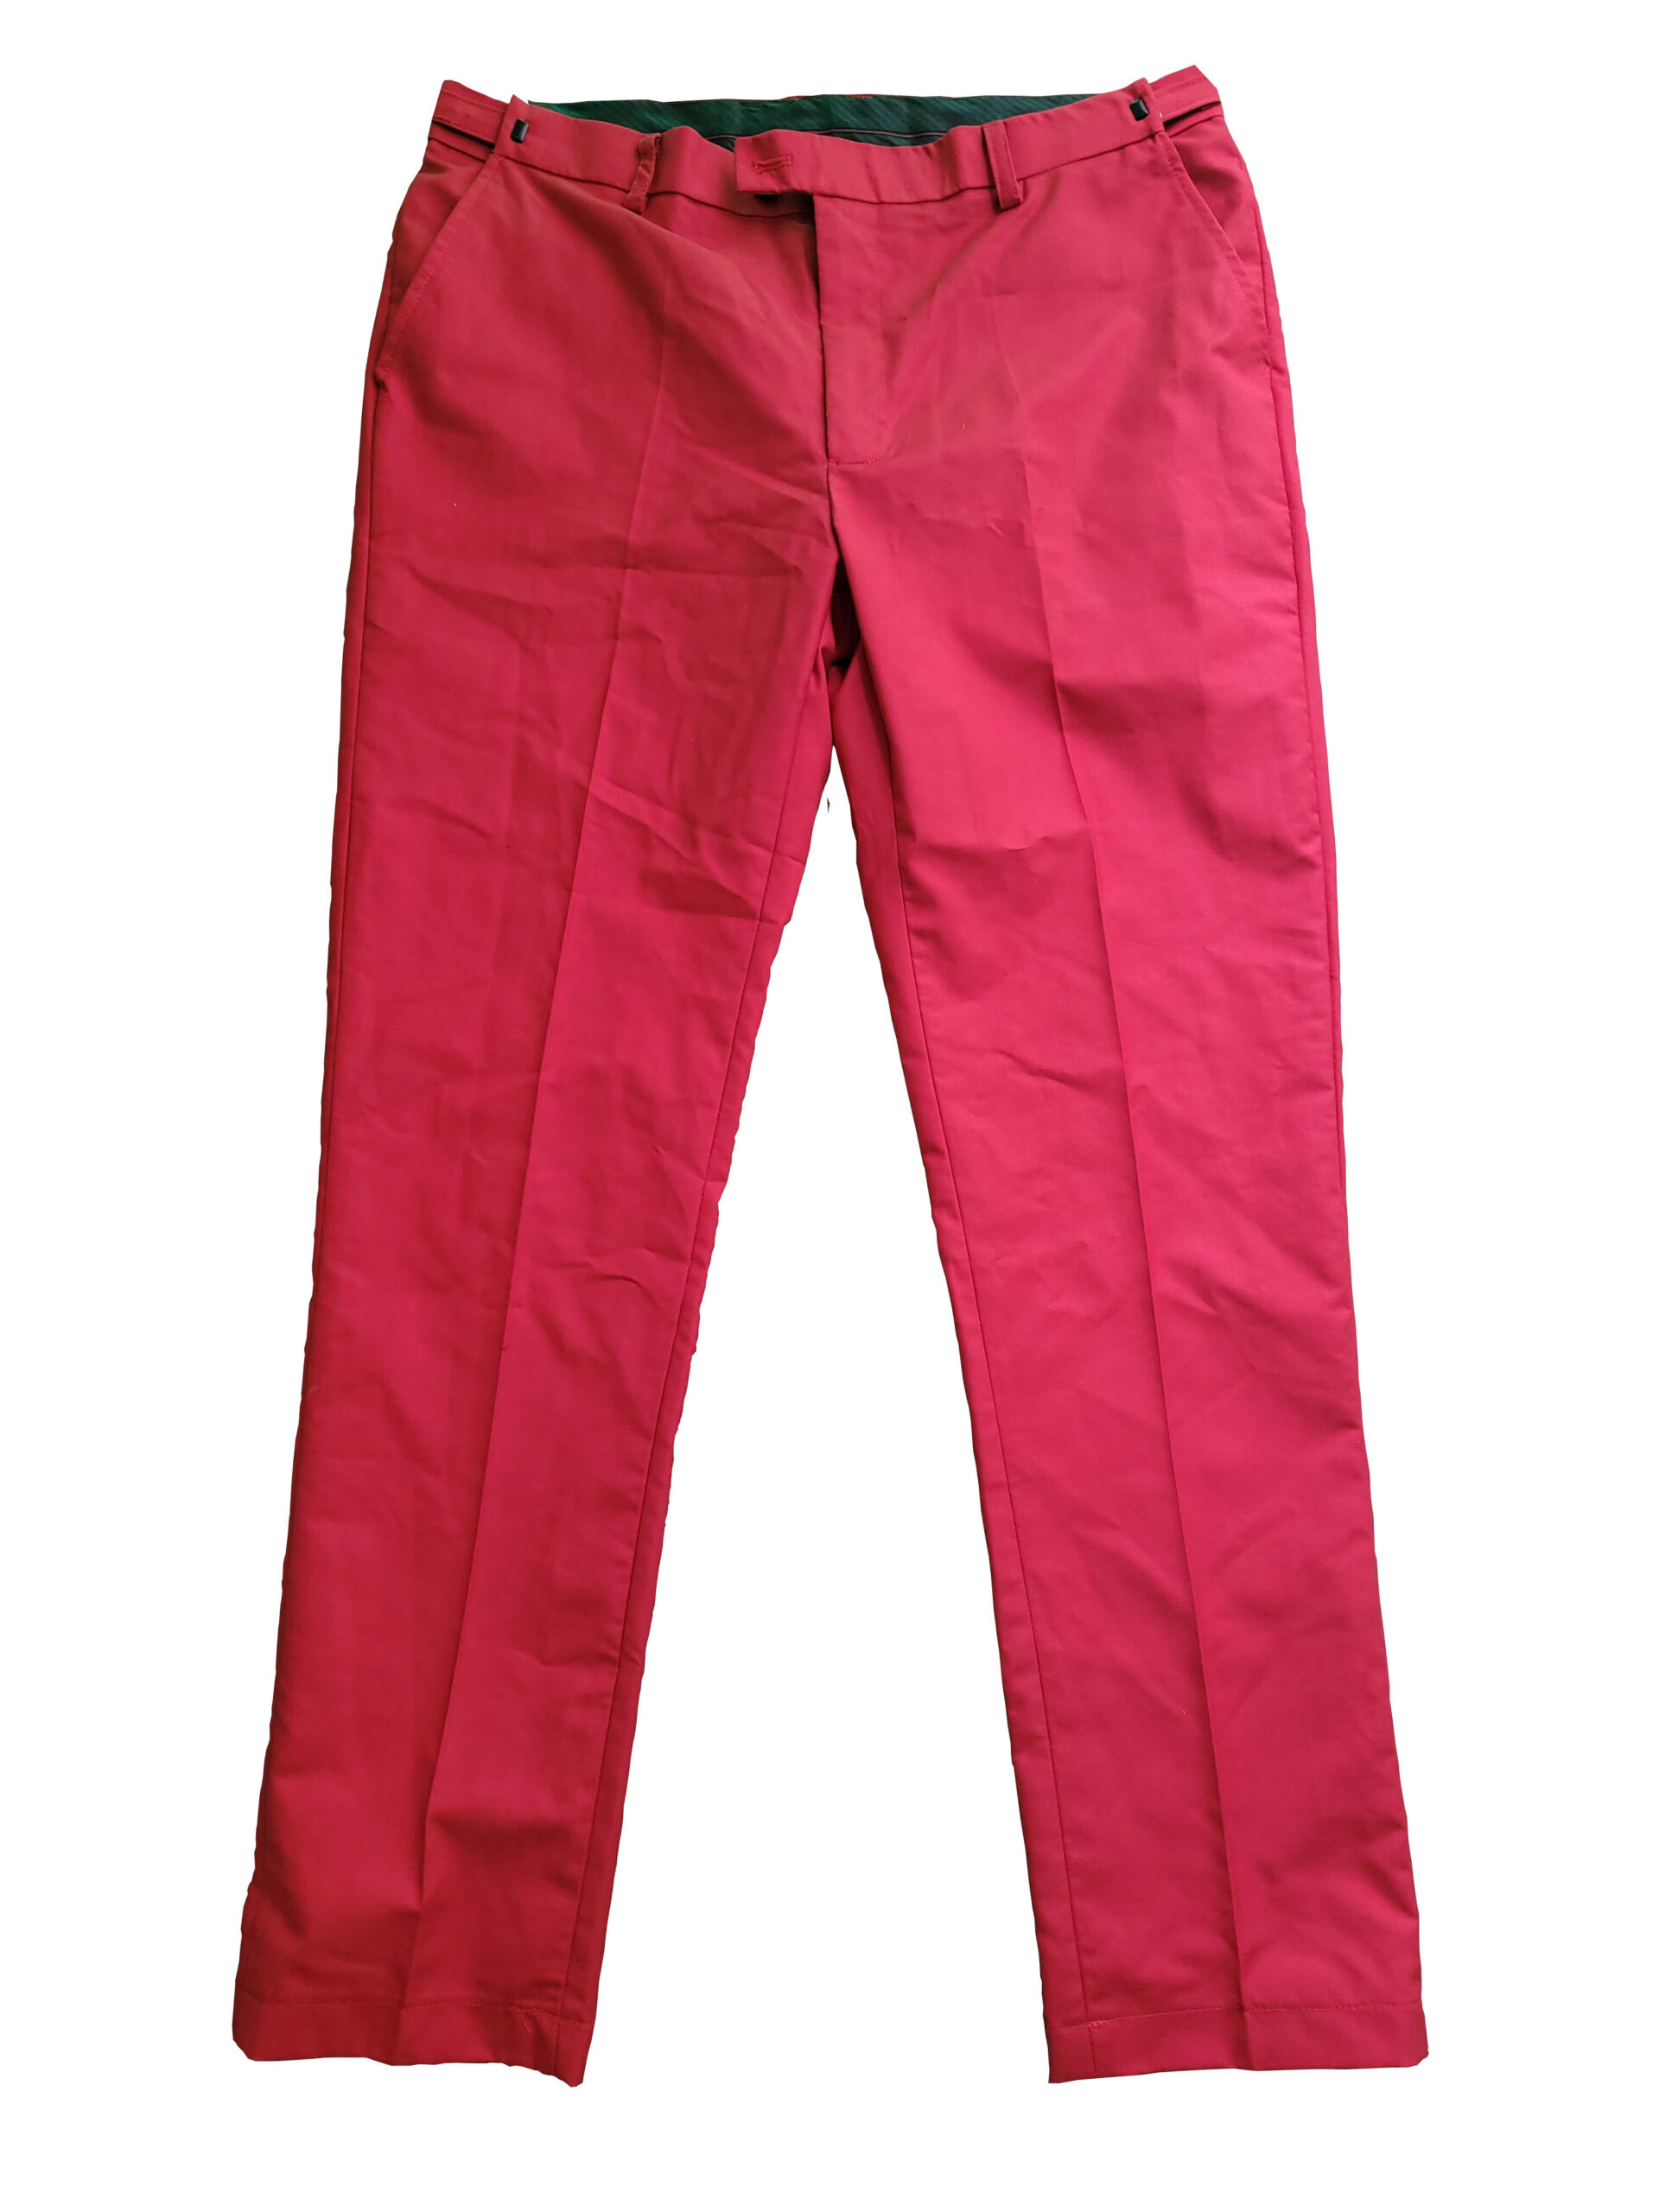 red cloth pants for men